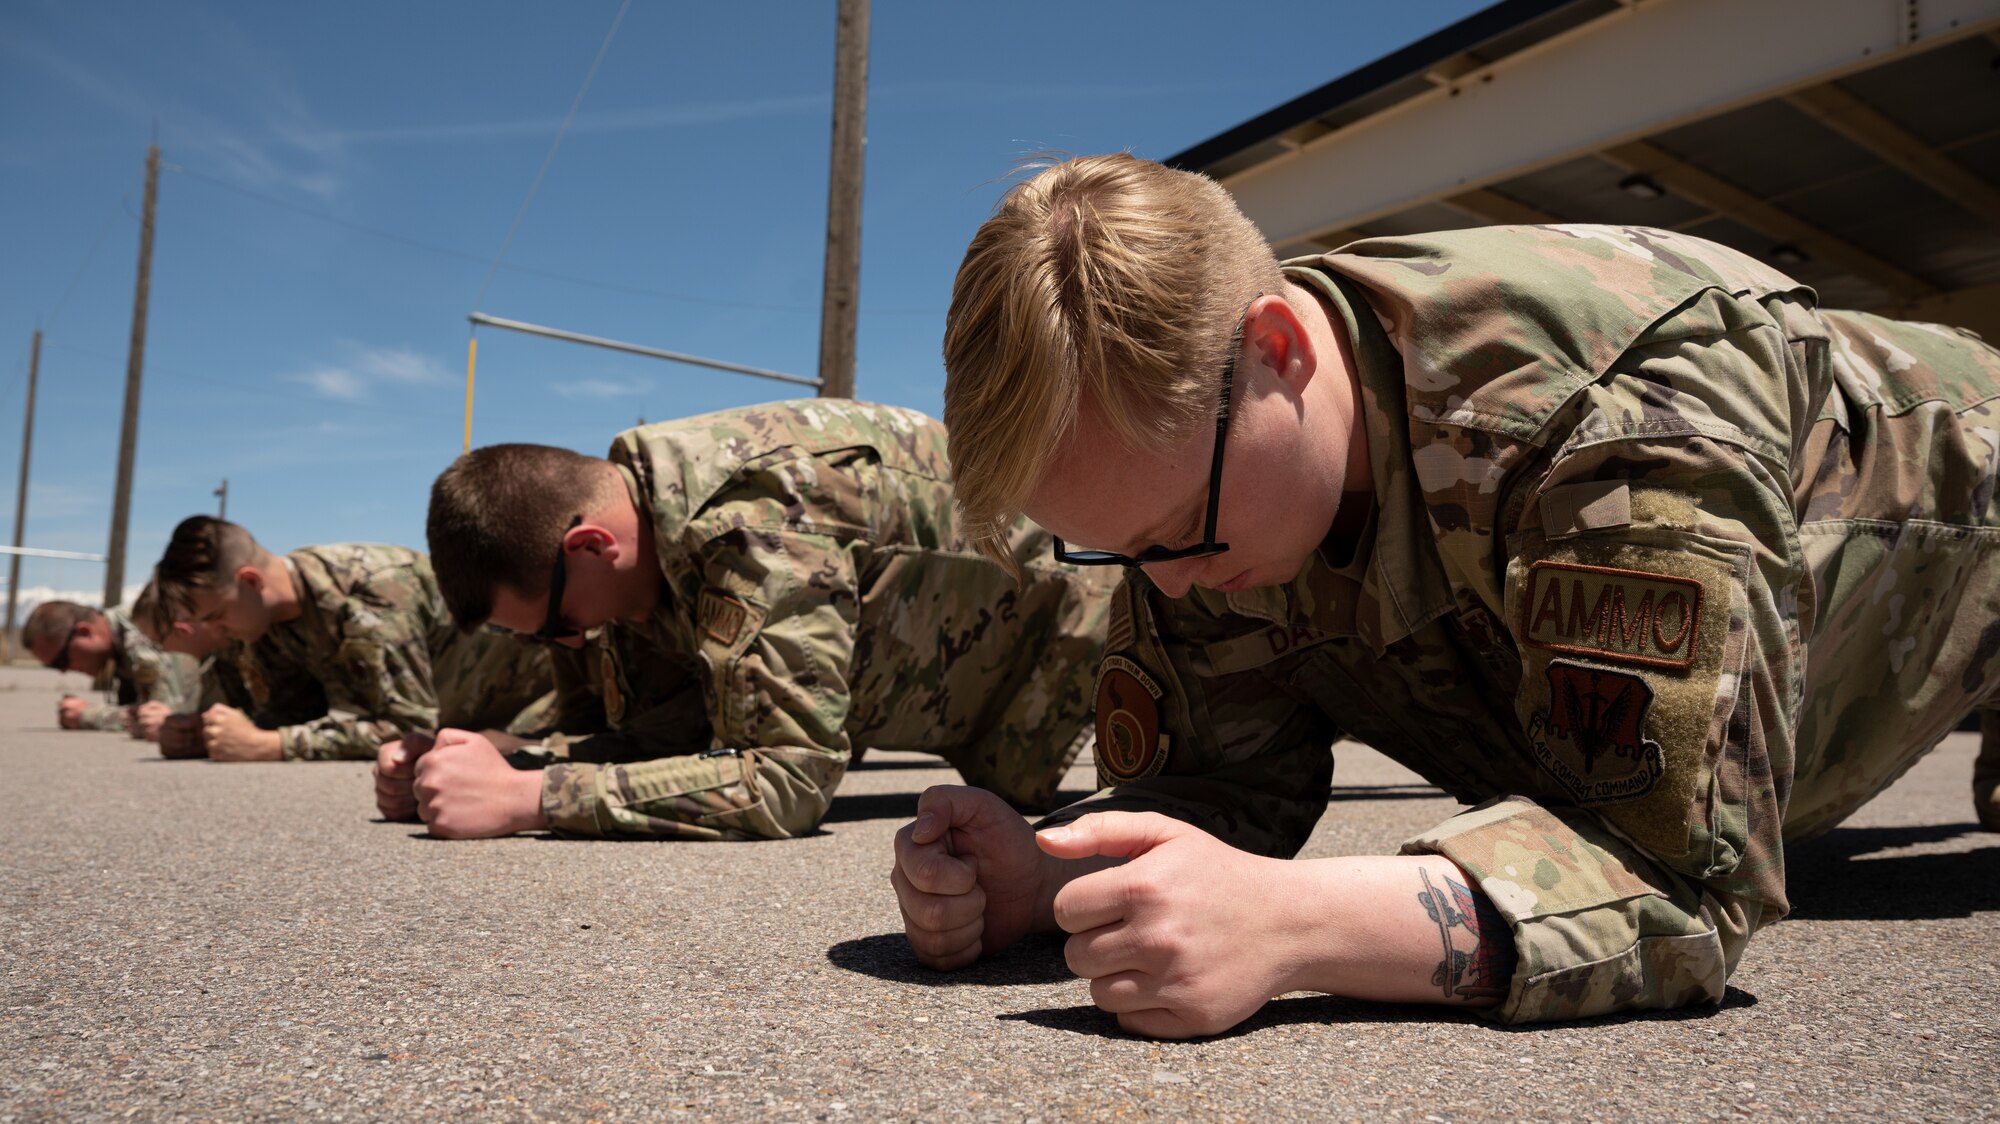 Senior Airman Katelyn Day, 388th Munitions Squadron, along with other Airman hold a plank pose during a timed assessment at Hill Air Force Base, Utah,